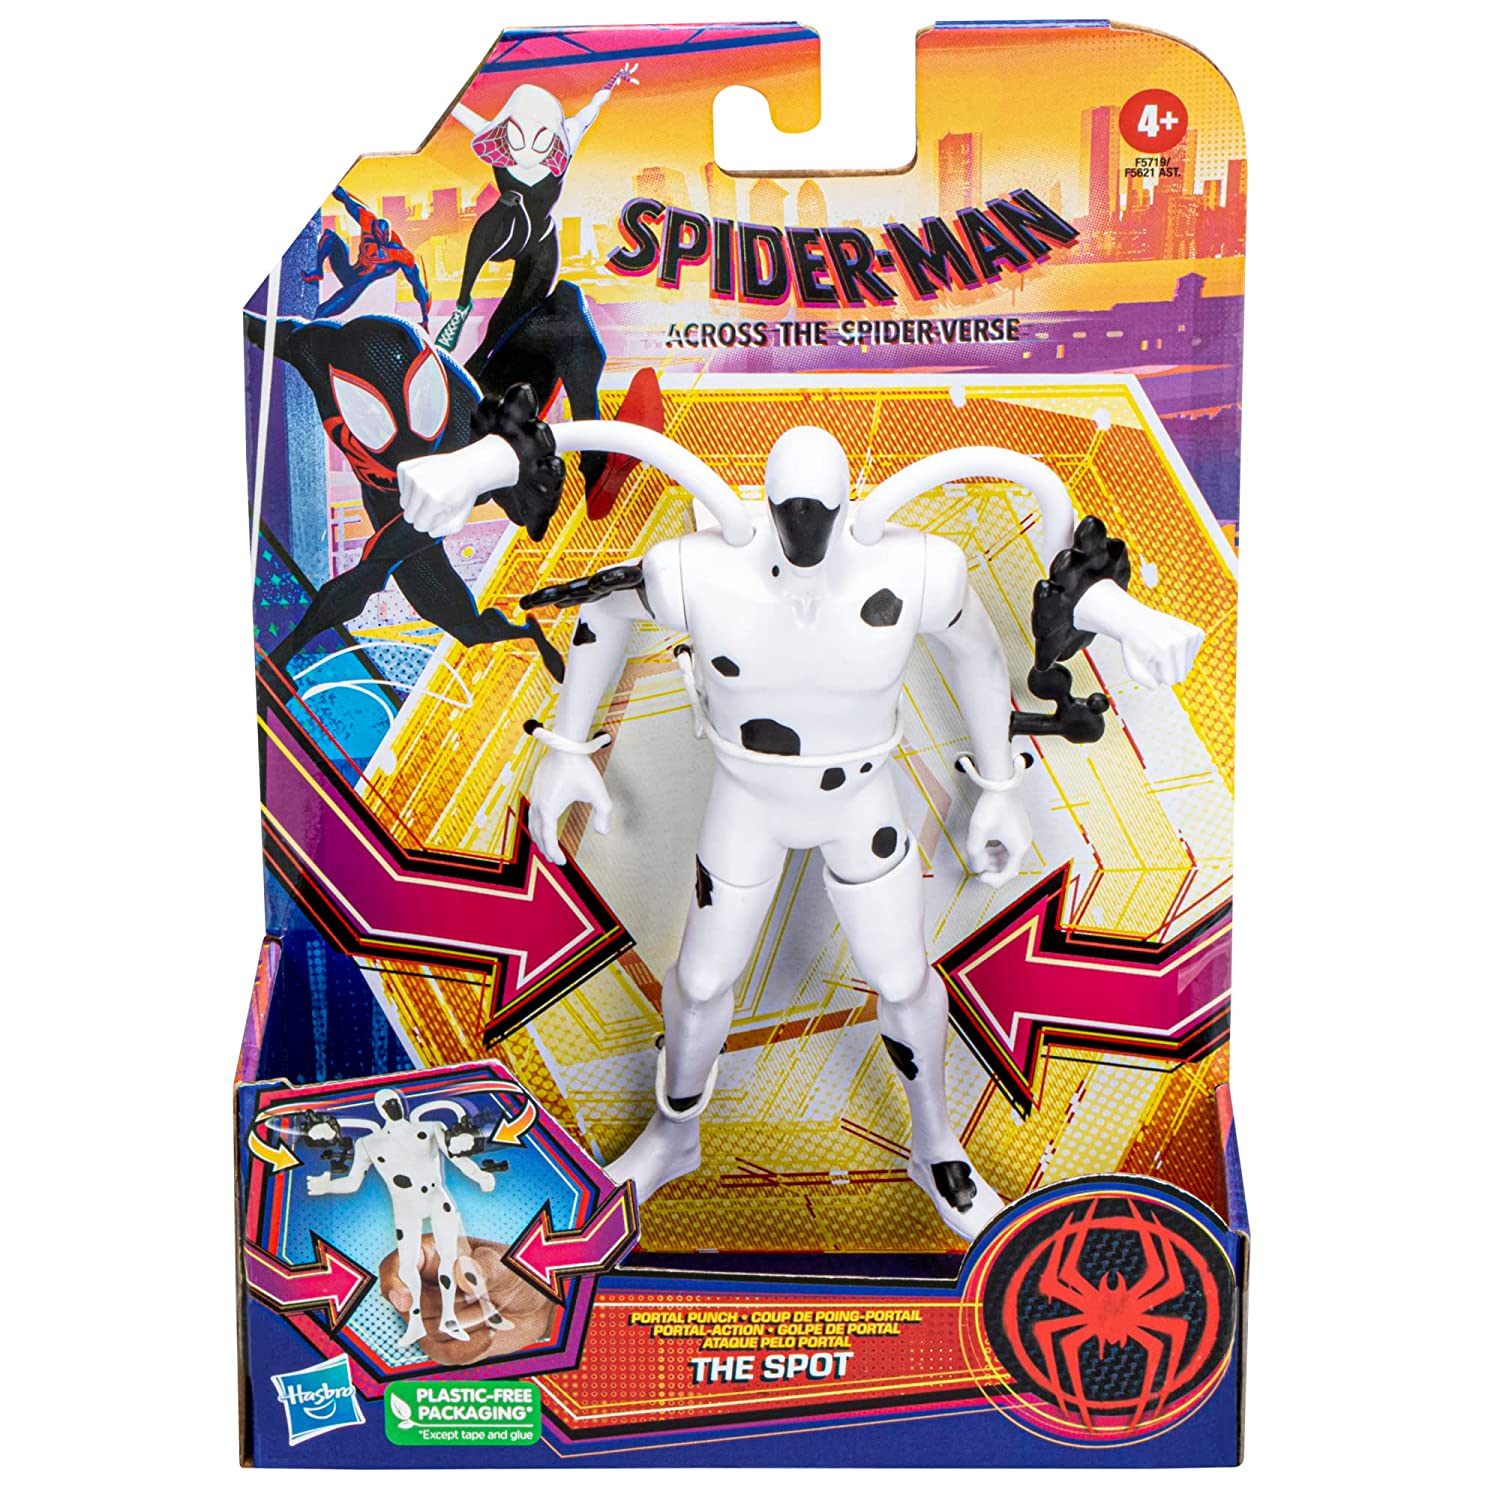 Marvel Spider Man Across The Spider-verse Portal Punch The Spot Toy, 6 Action Figure - Ages 4+